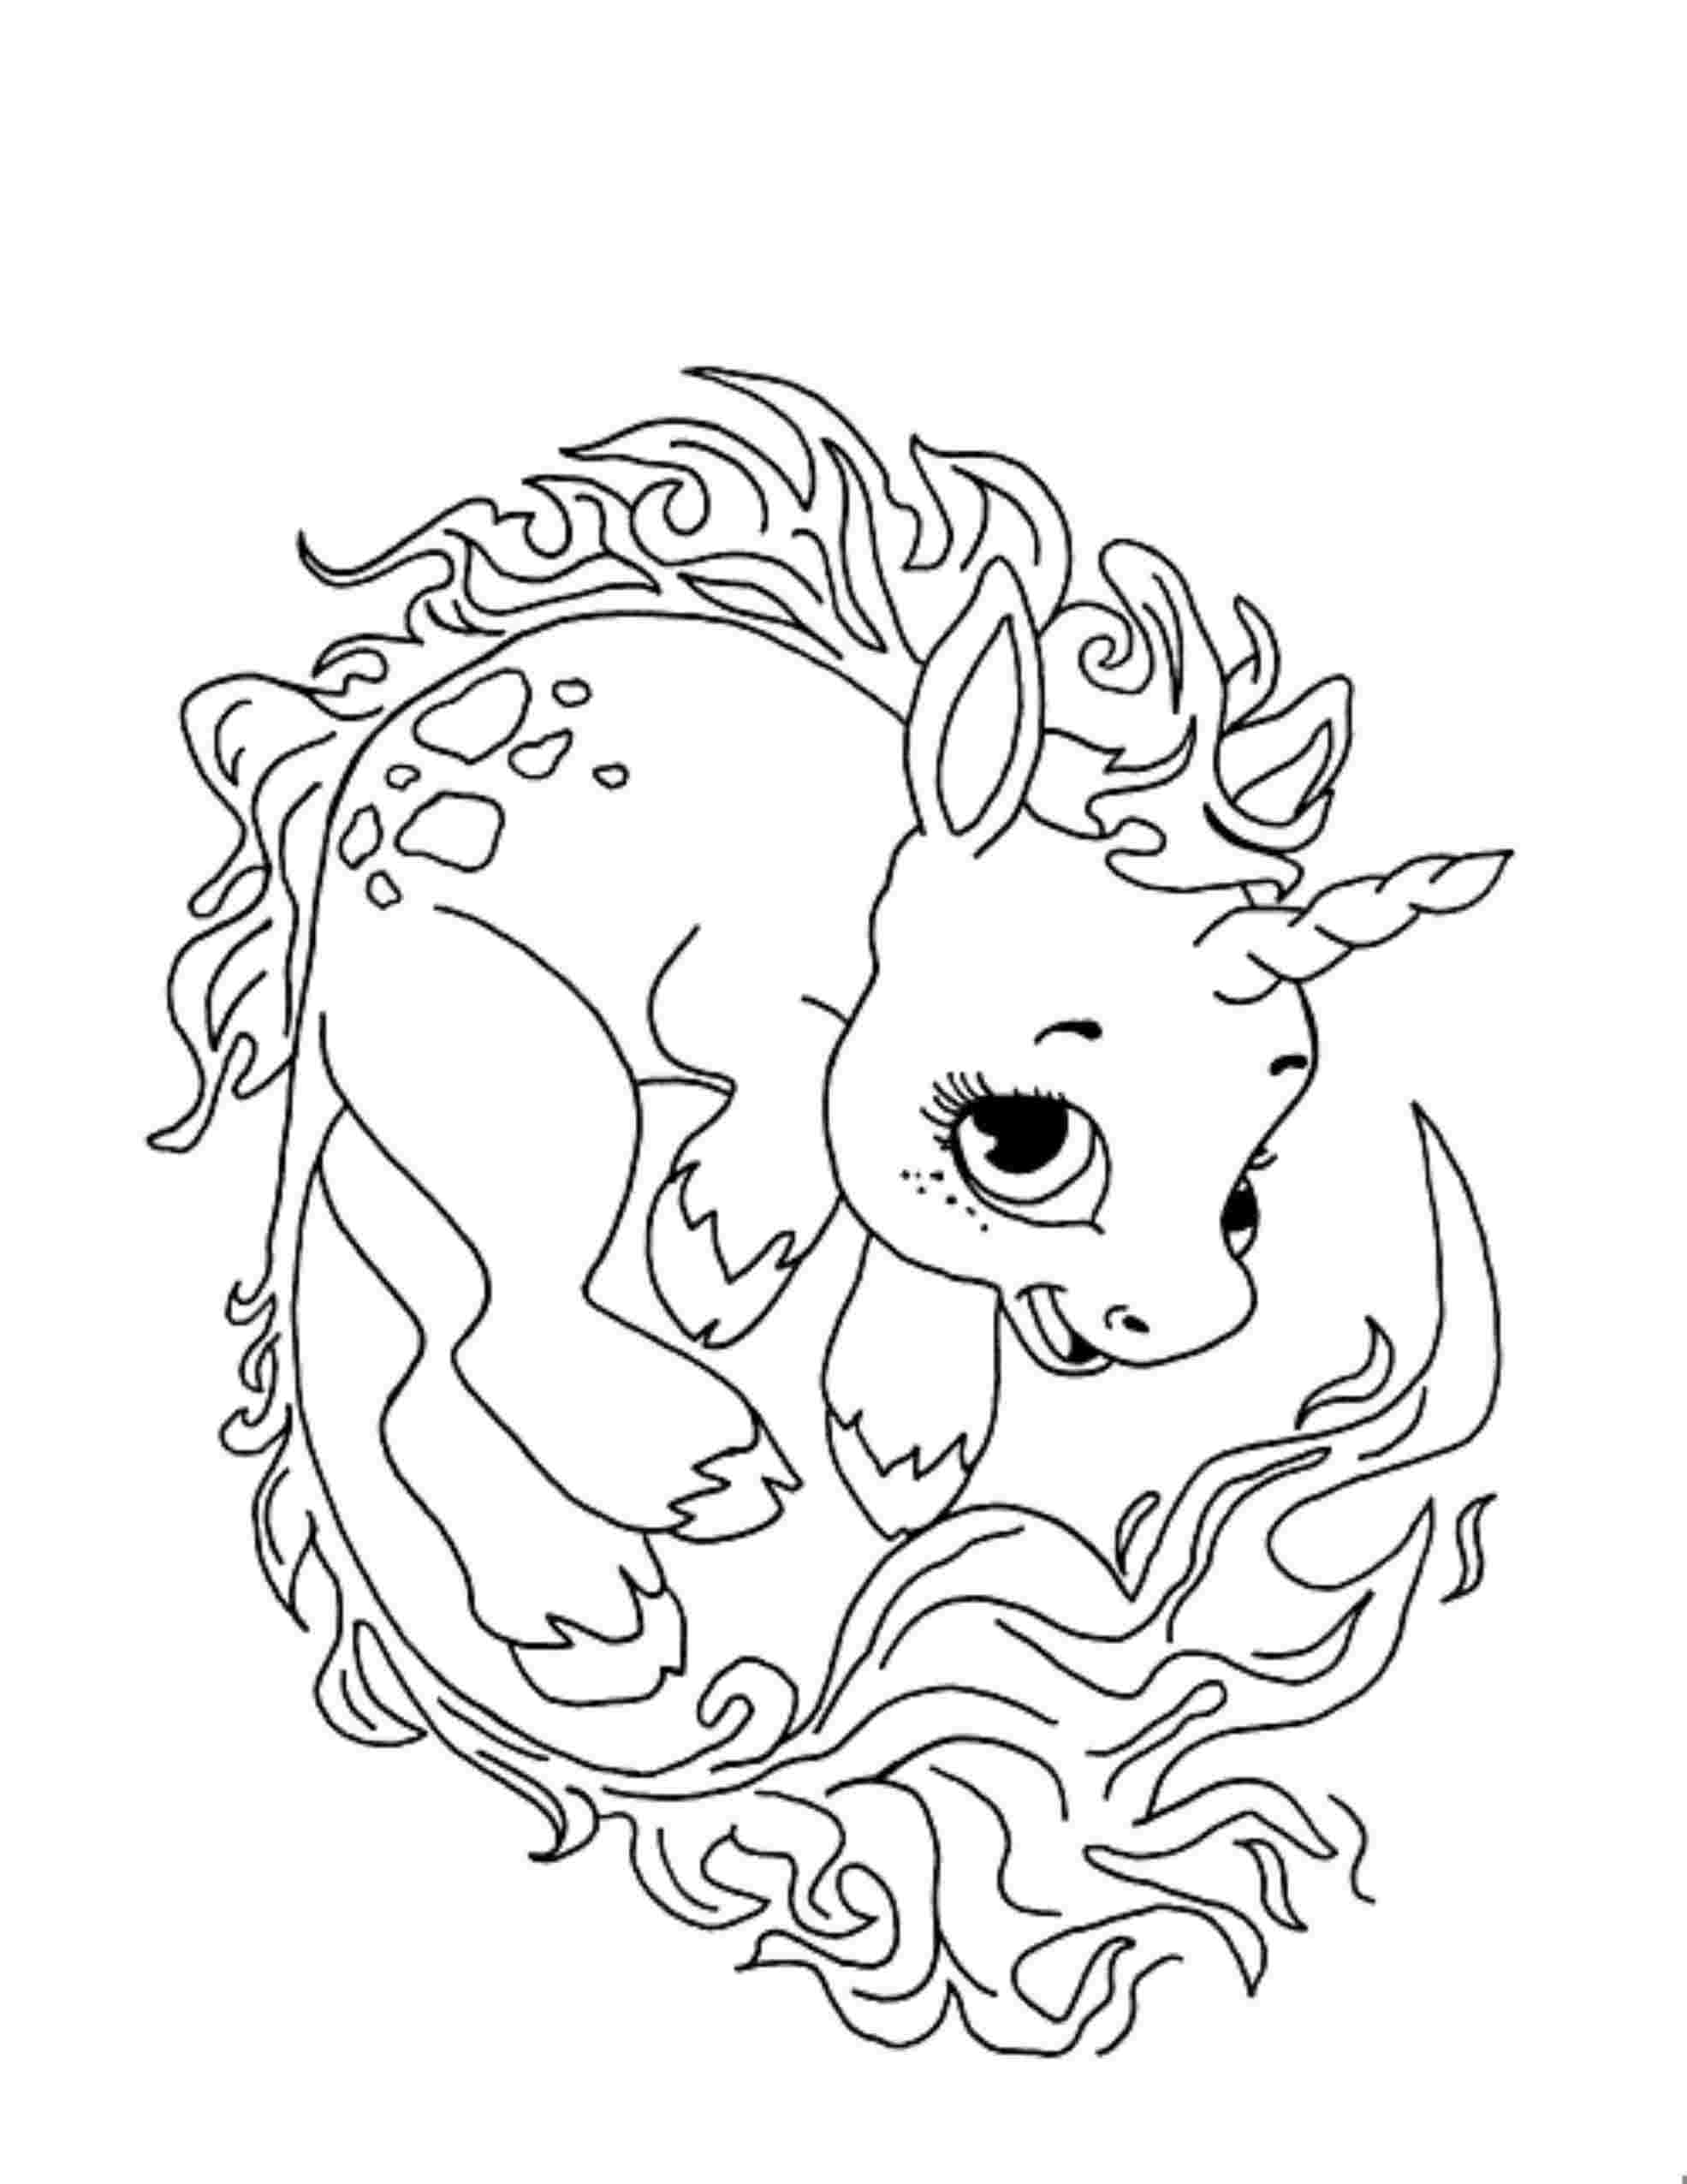 Coloring Pages : Colouring Unicorn Princess Coloring With Free ...